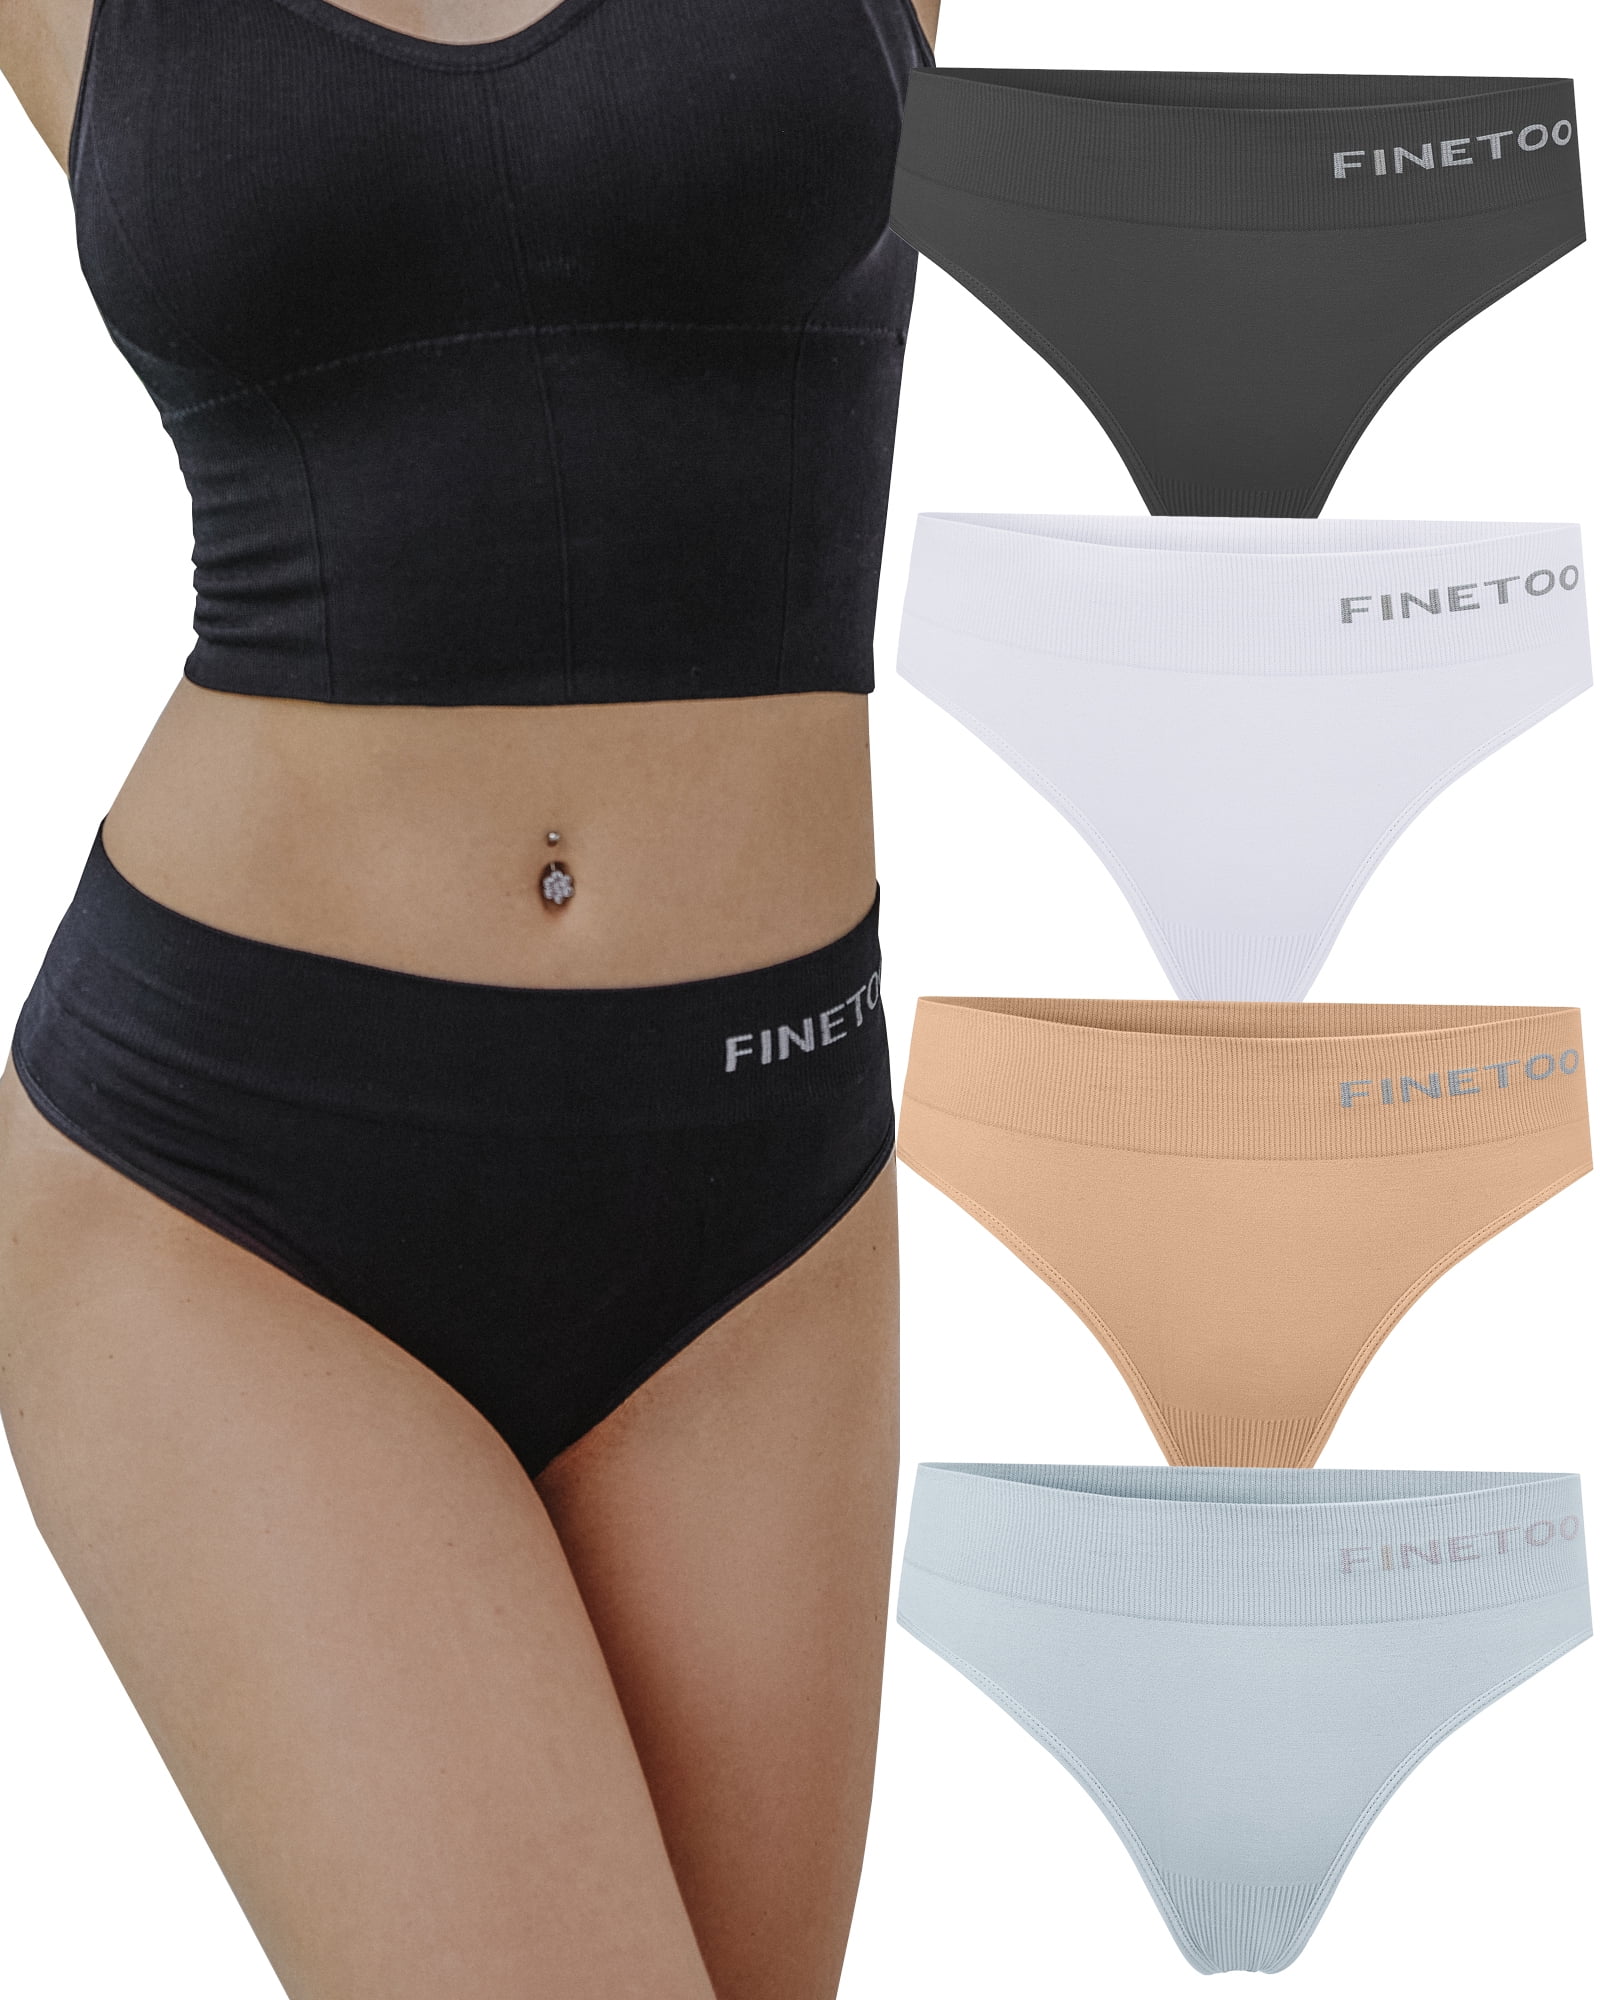 Finetoo 2 Pack High Waisted Underwear for Women Tummy Control Panties High  Rise Body Shaper Brief Nylon Seamless Bikini Panty for Ladies S-XL